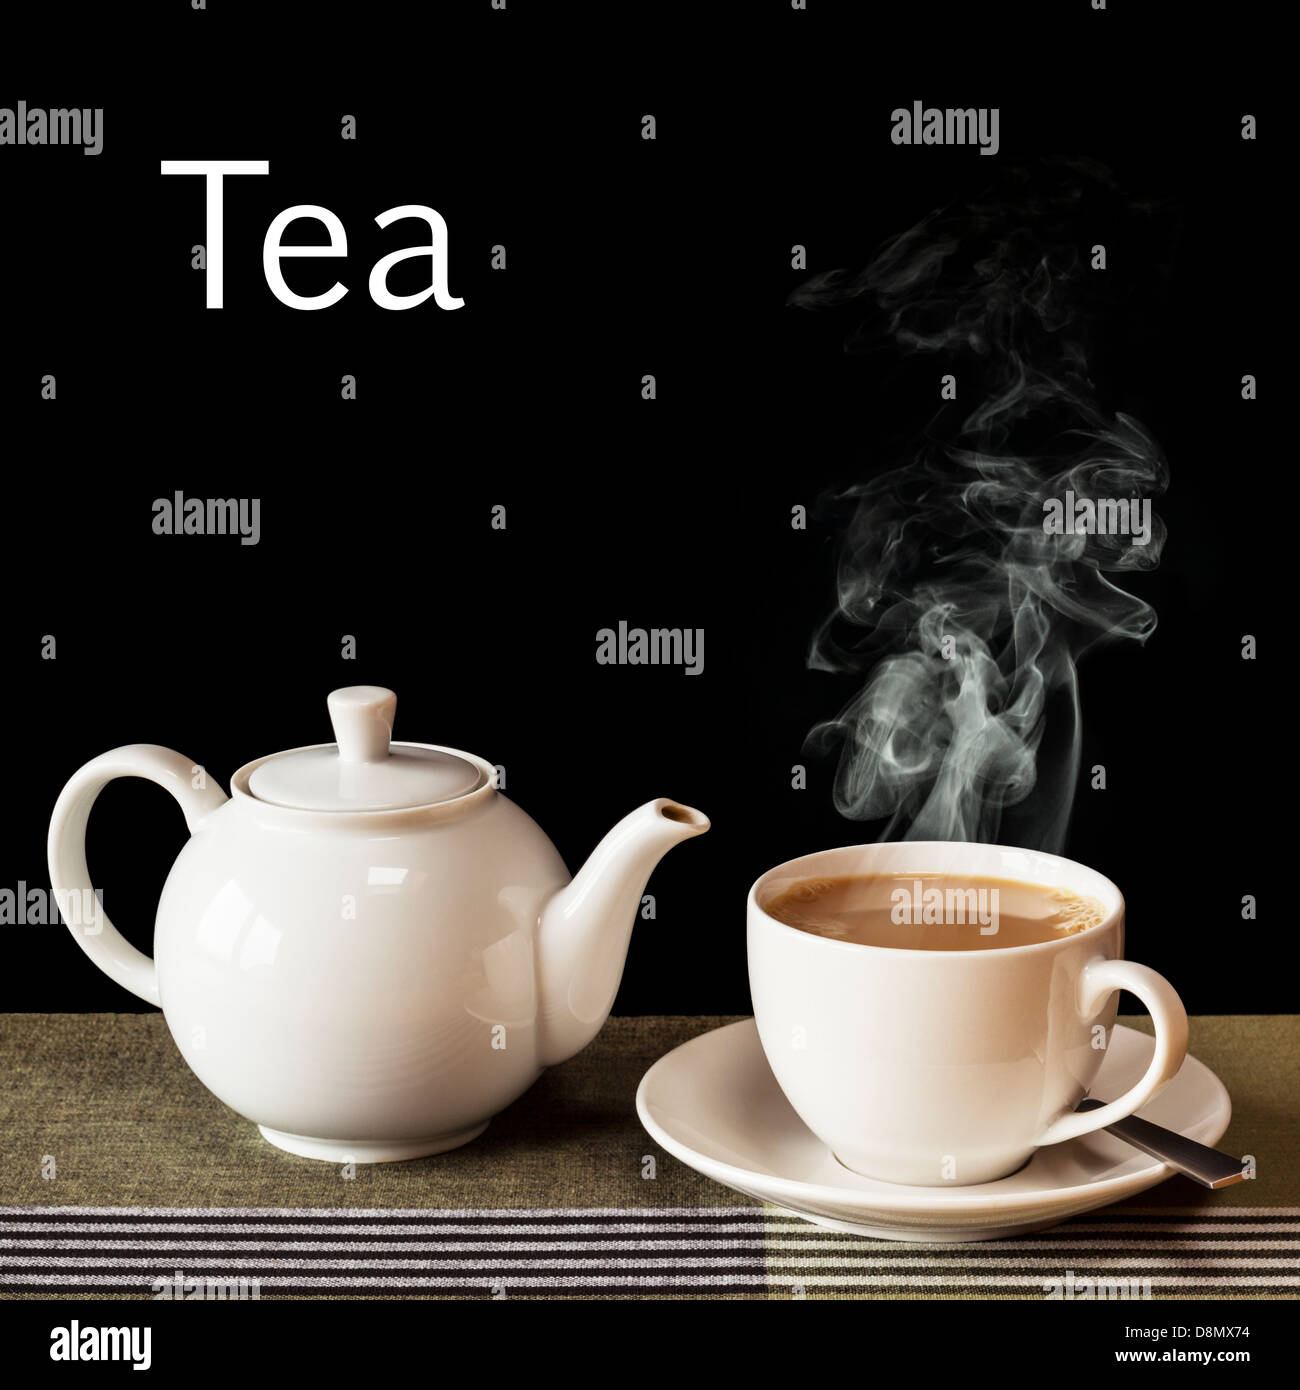 Tea concept - a hot, steaming cup of tea with a teapot, on a black background with the word Tea in white. Stock Photo